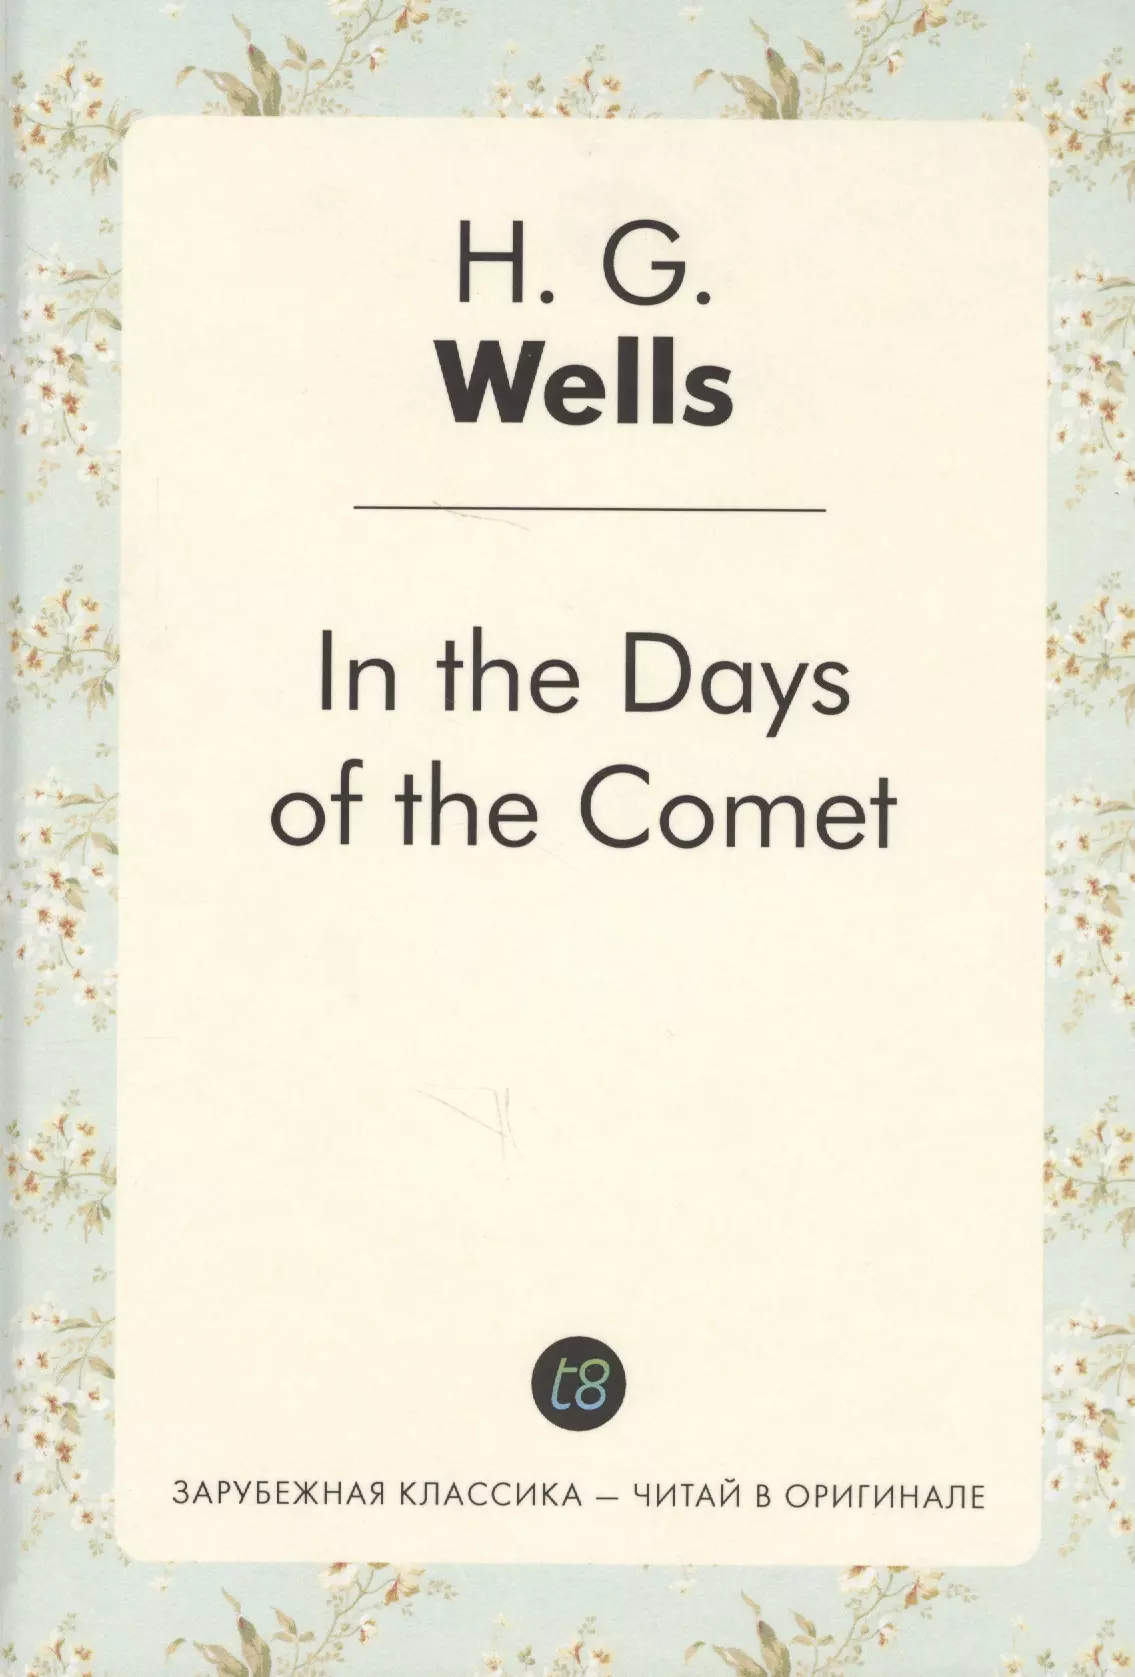 foreign language book in the days of the comet в дникометы роман на английском языке wells h g Уэллс Герберт Джордж In the Days of the Comet = В дникометы: роман на англ.яз